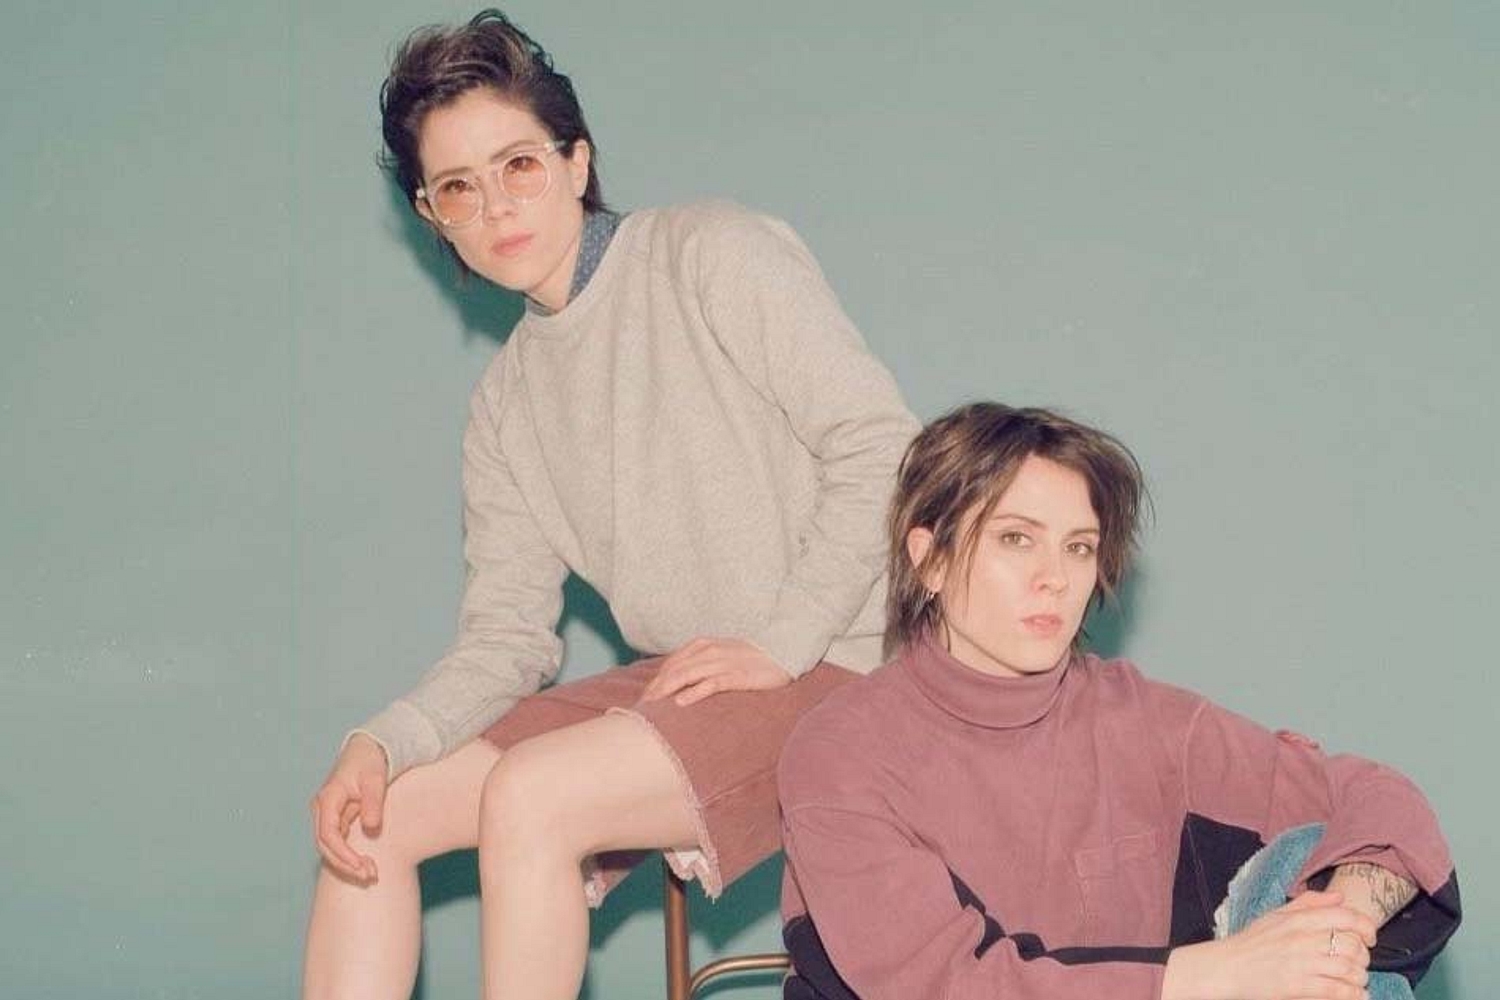 Tegan and Sara announce ‘Hey, I’m Just Like You’ track listing, share ‘I’ll Be Back Someday’